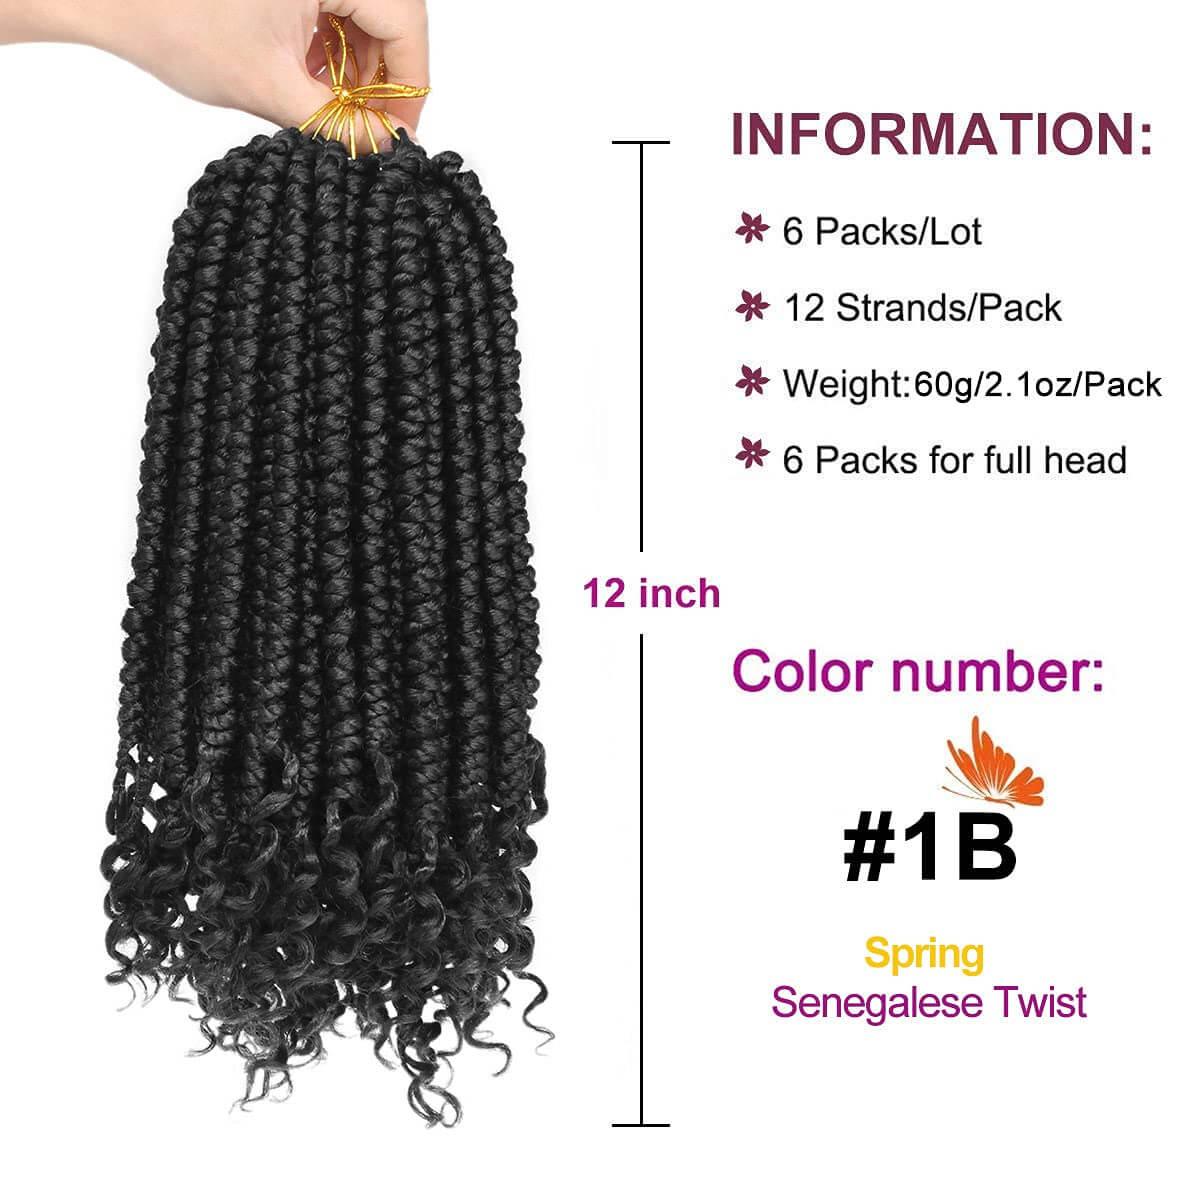 6 Tips for Crochet Senegalese Twists Using Pre-Twisted Hair